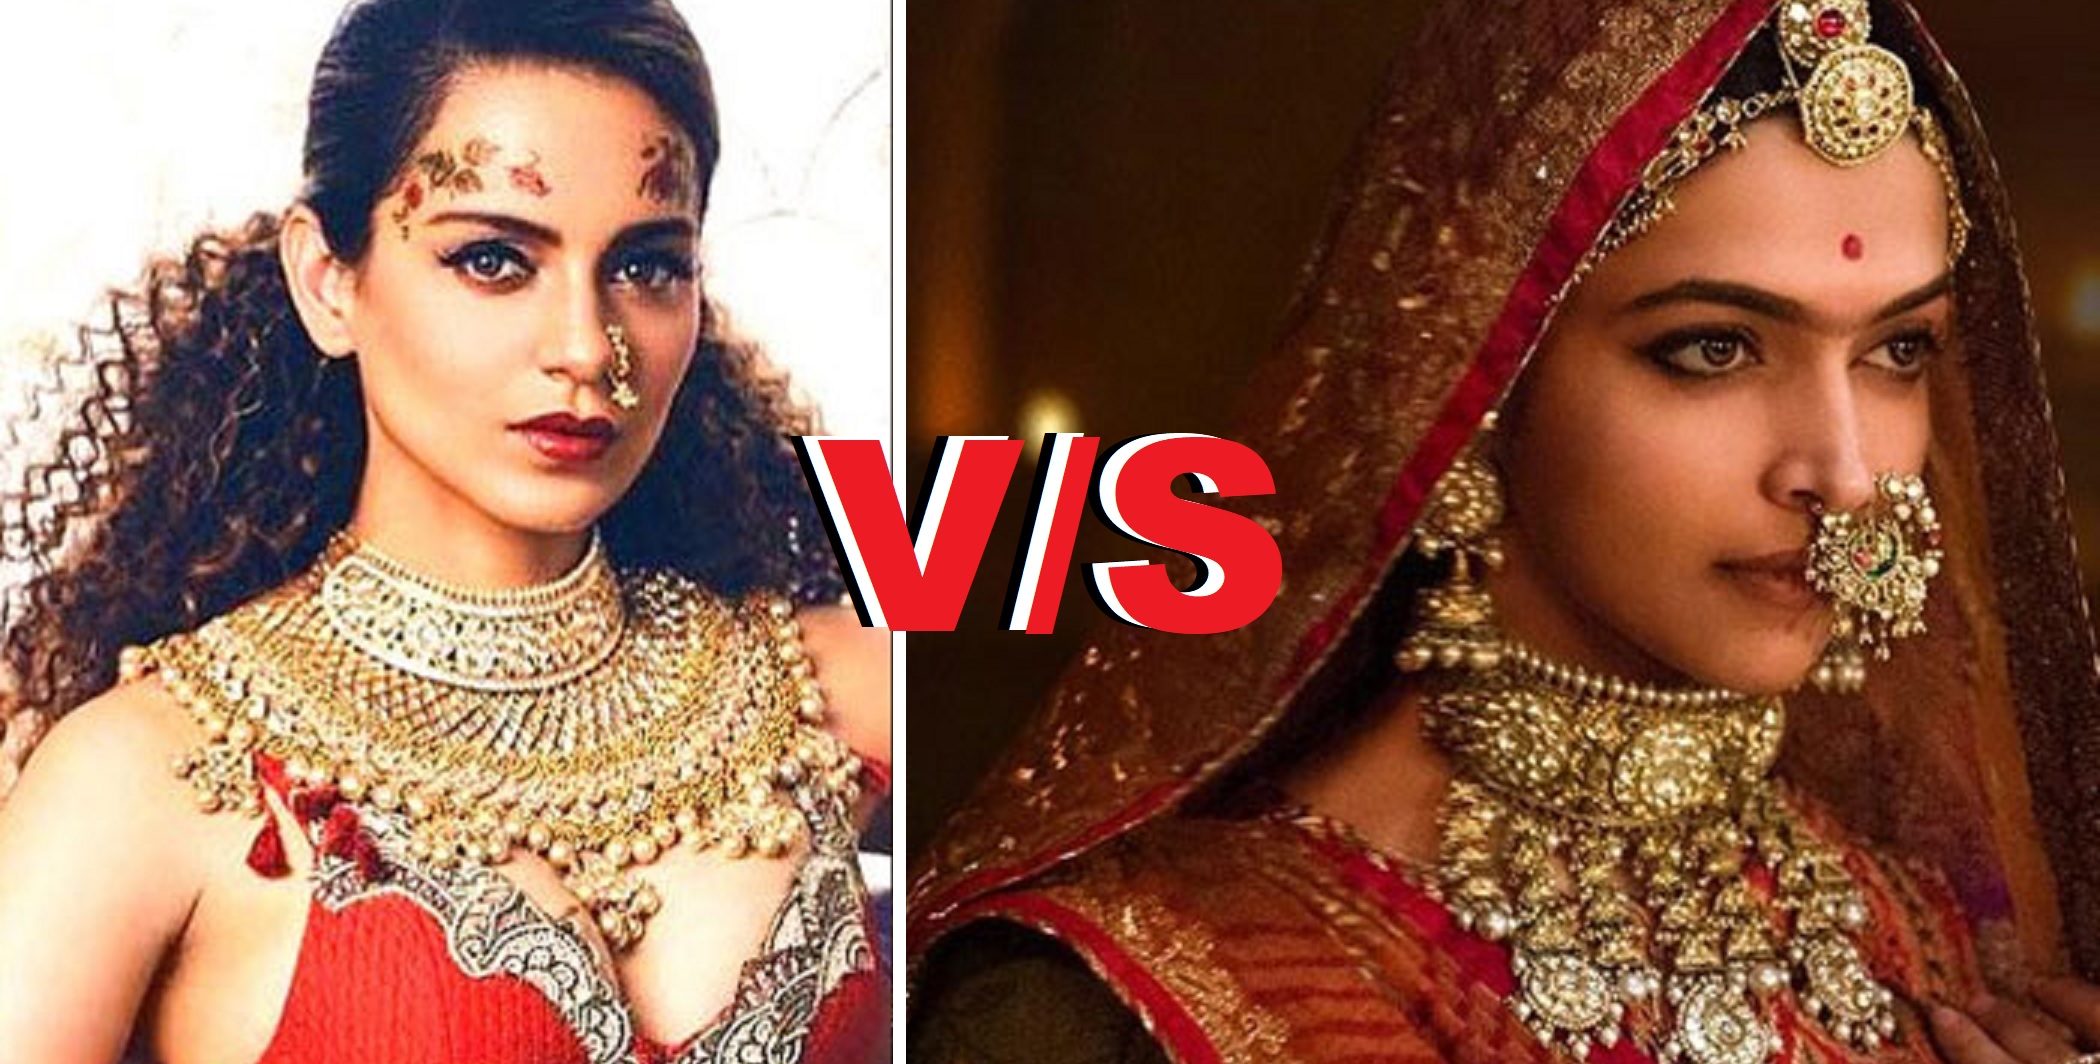 POLL: Kangana VS Deepika – Who Is The Better Actress? Vote Here!